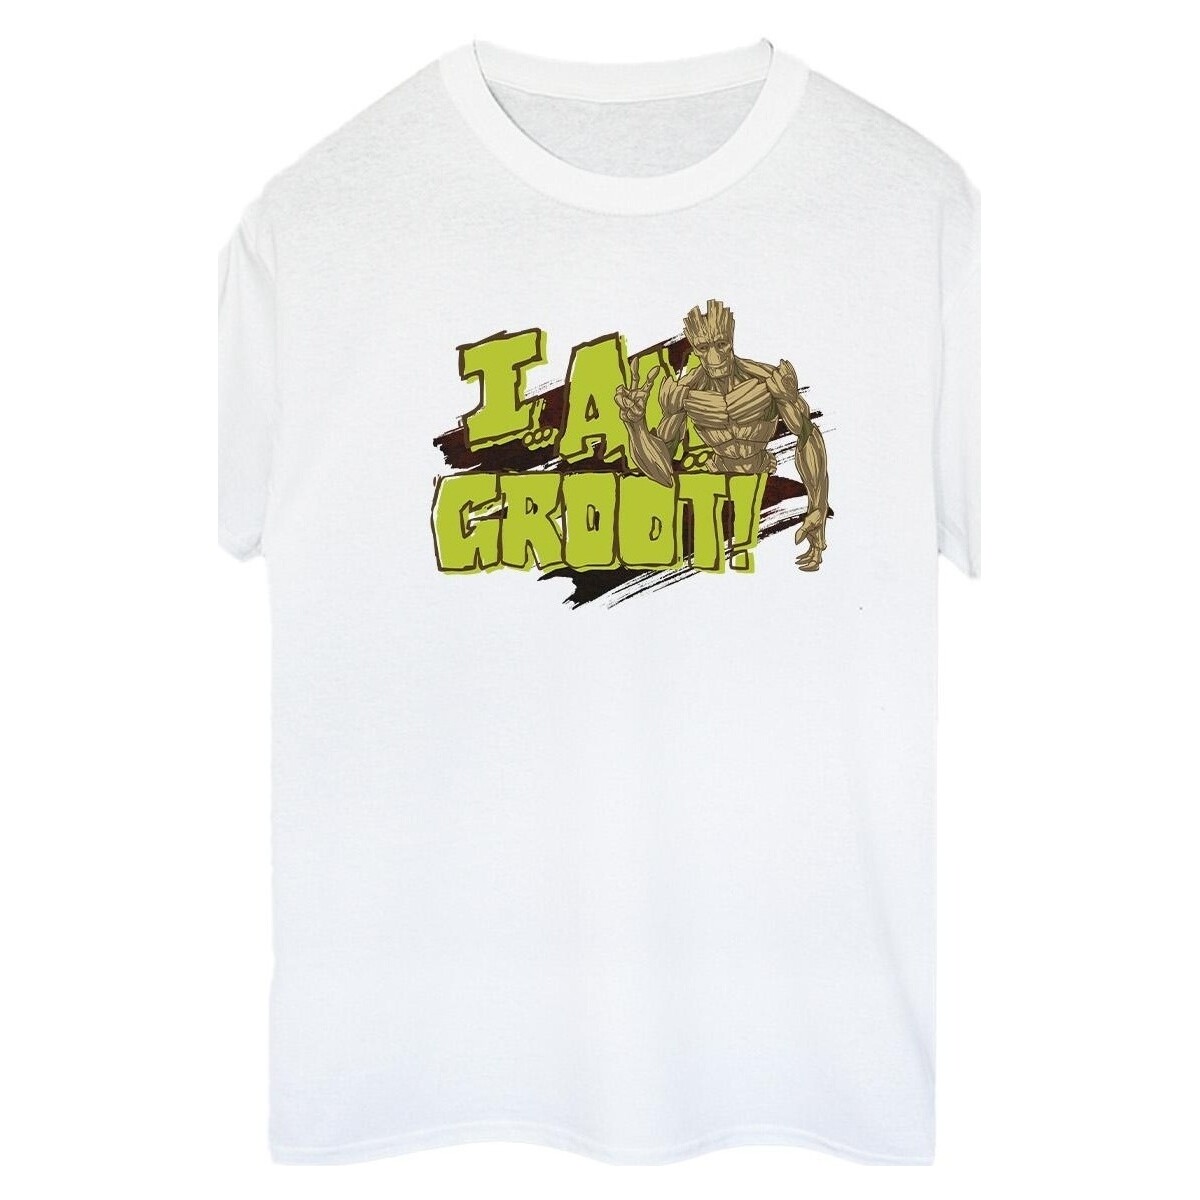 Vêtements Femme T-shirts manches longues Guardians Of The Galaxy I Am Groot Blanc